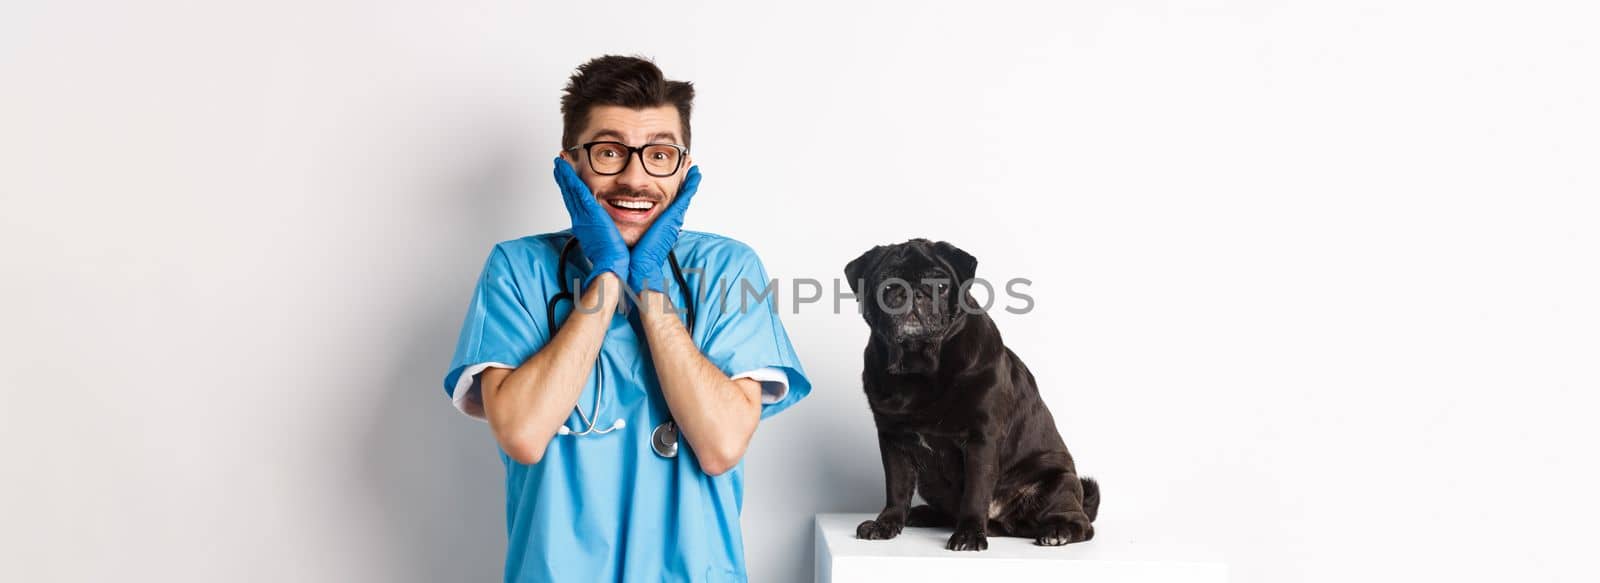 Excited young male doctor veterinarian admiring cute pet sitting on table. Cute black pug dog waiting for examination at vet clinic, white background.